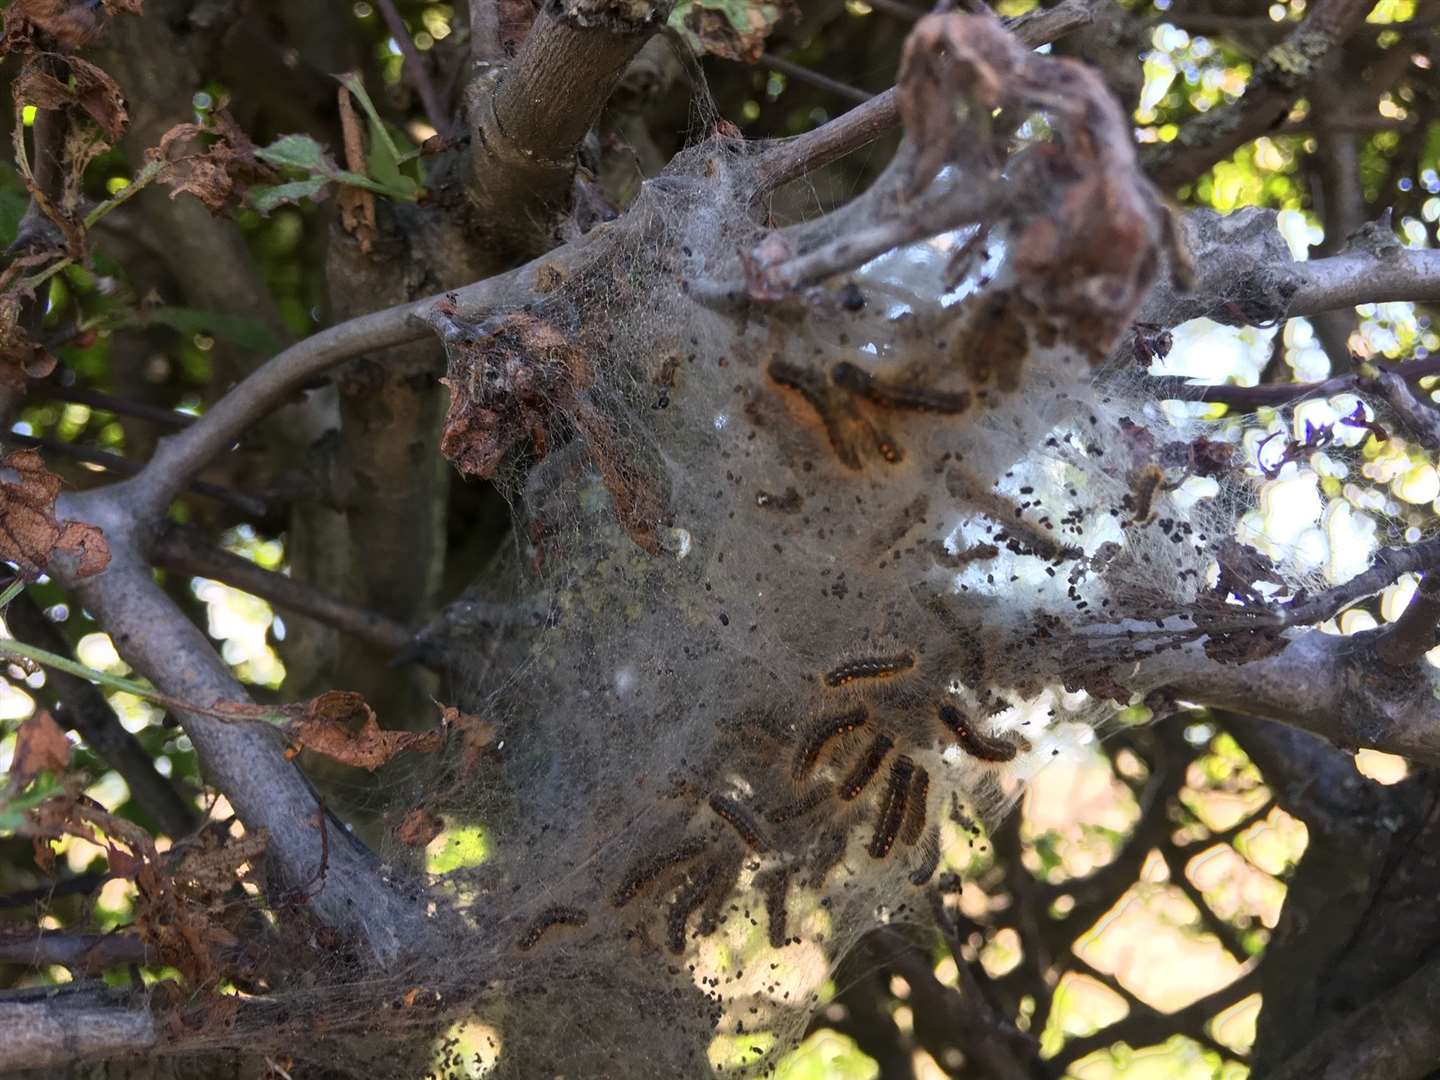 The toxic caterpillars are often in webs